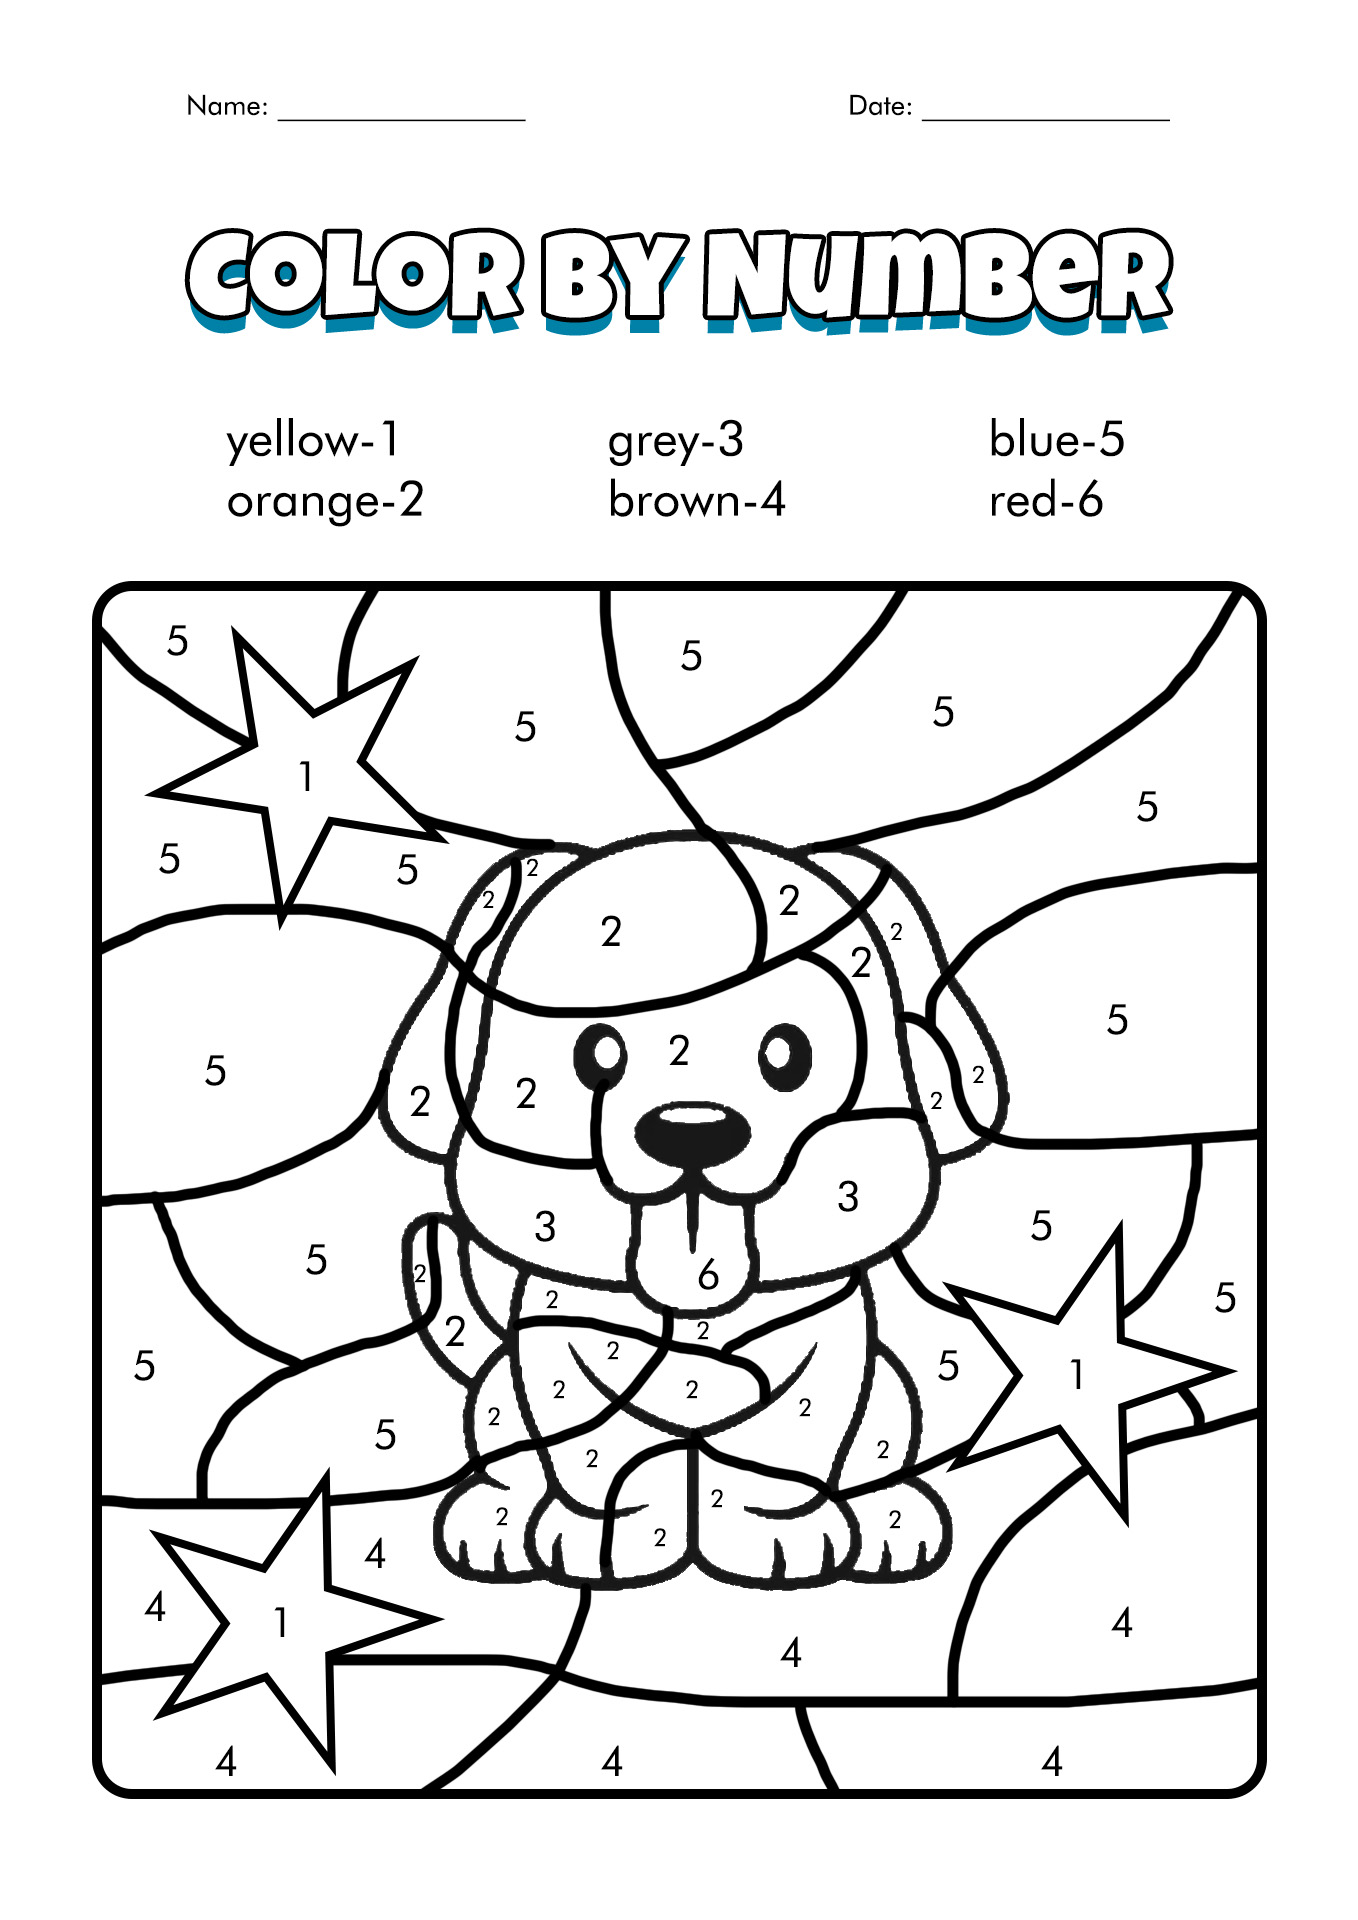 color-by-numbers-for-adults-printable-get-your-hands-on-amazing-free